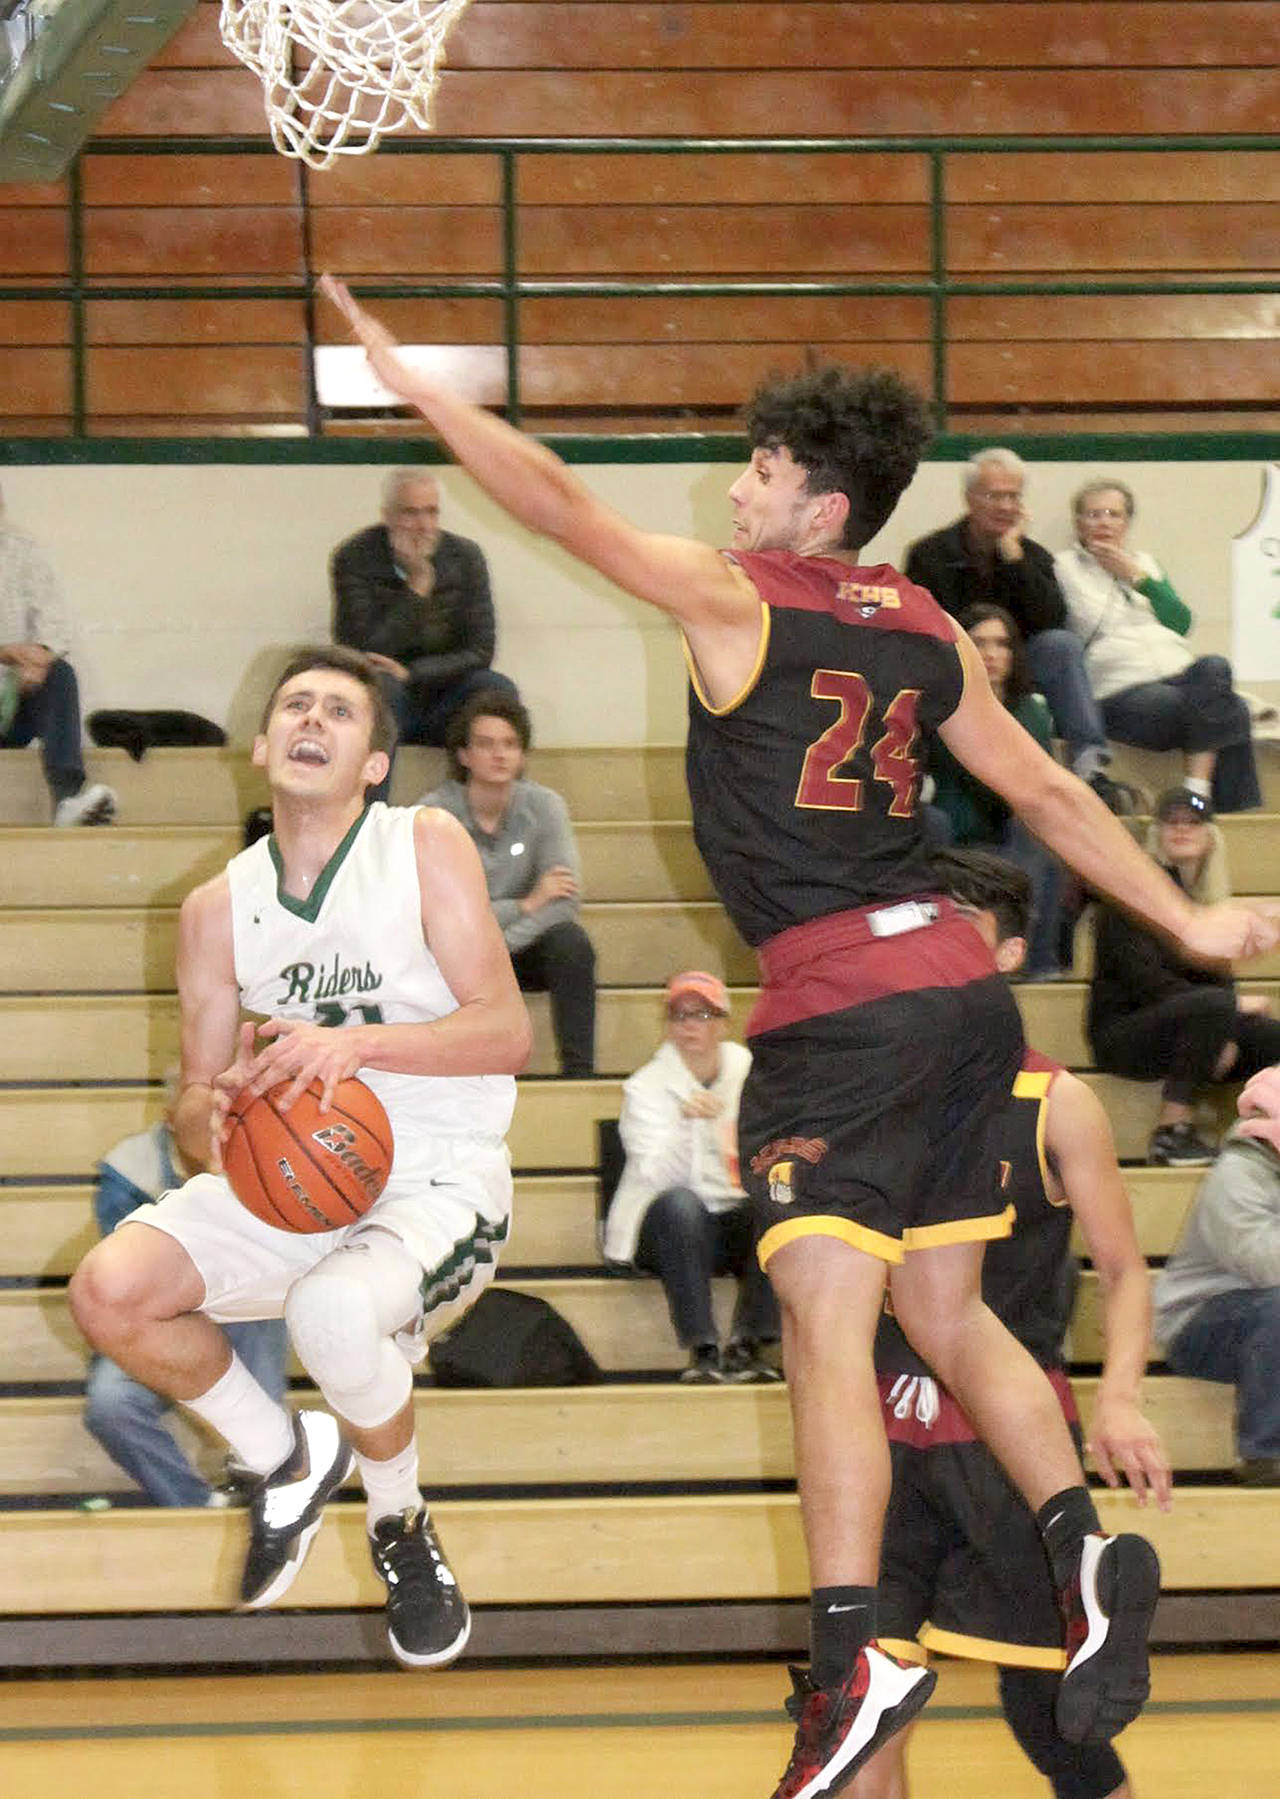 Dave Logan/for Peninsula Daily News Port Angeles’ Kyle Benedict, left, slips under the defense of Kingston’s Kynoa Sipai during the Roughriders’ 61-37 win over the Buccaneers at home Friday.